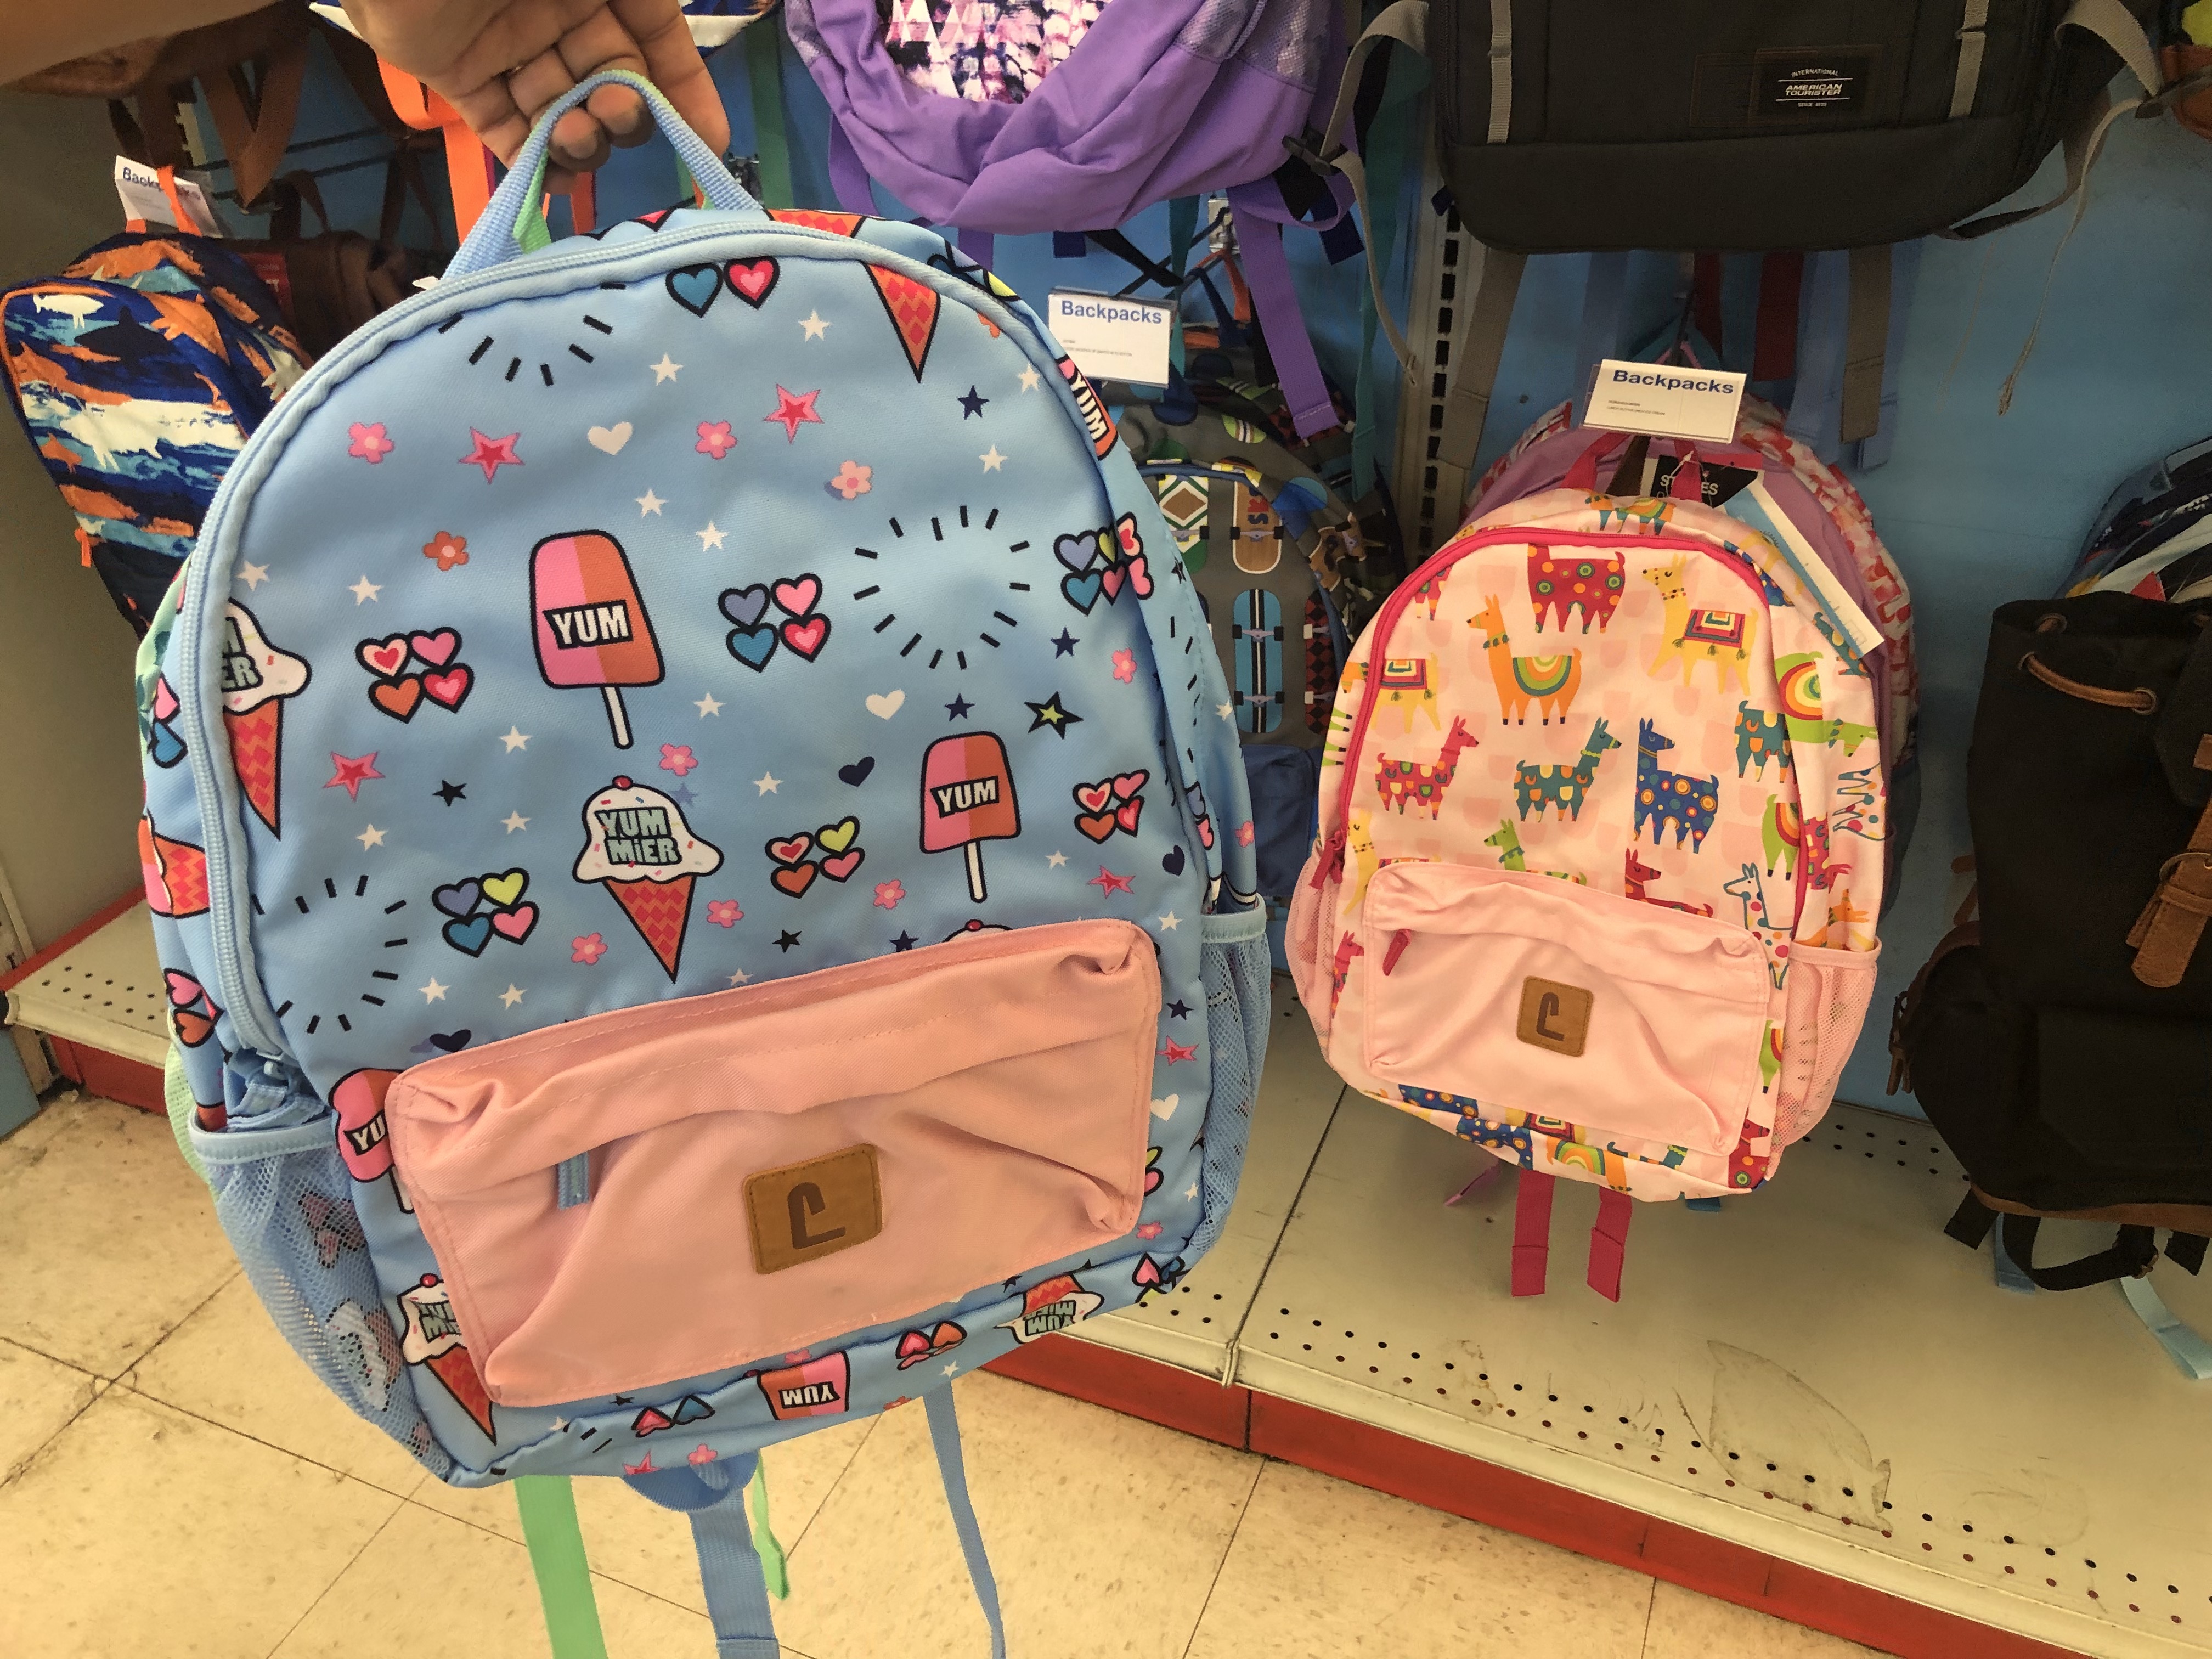 back to school deals at staples, target, and walmart - staples backpacks